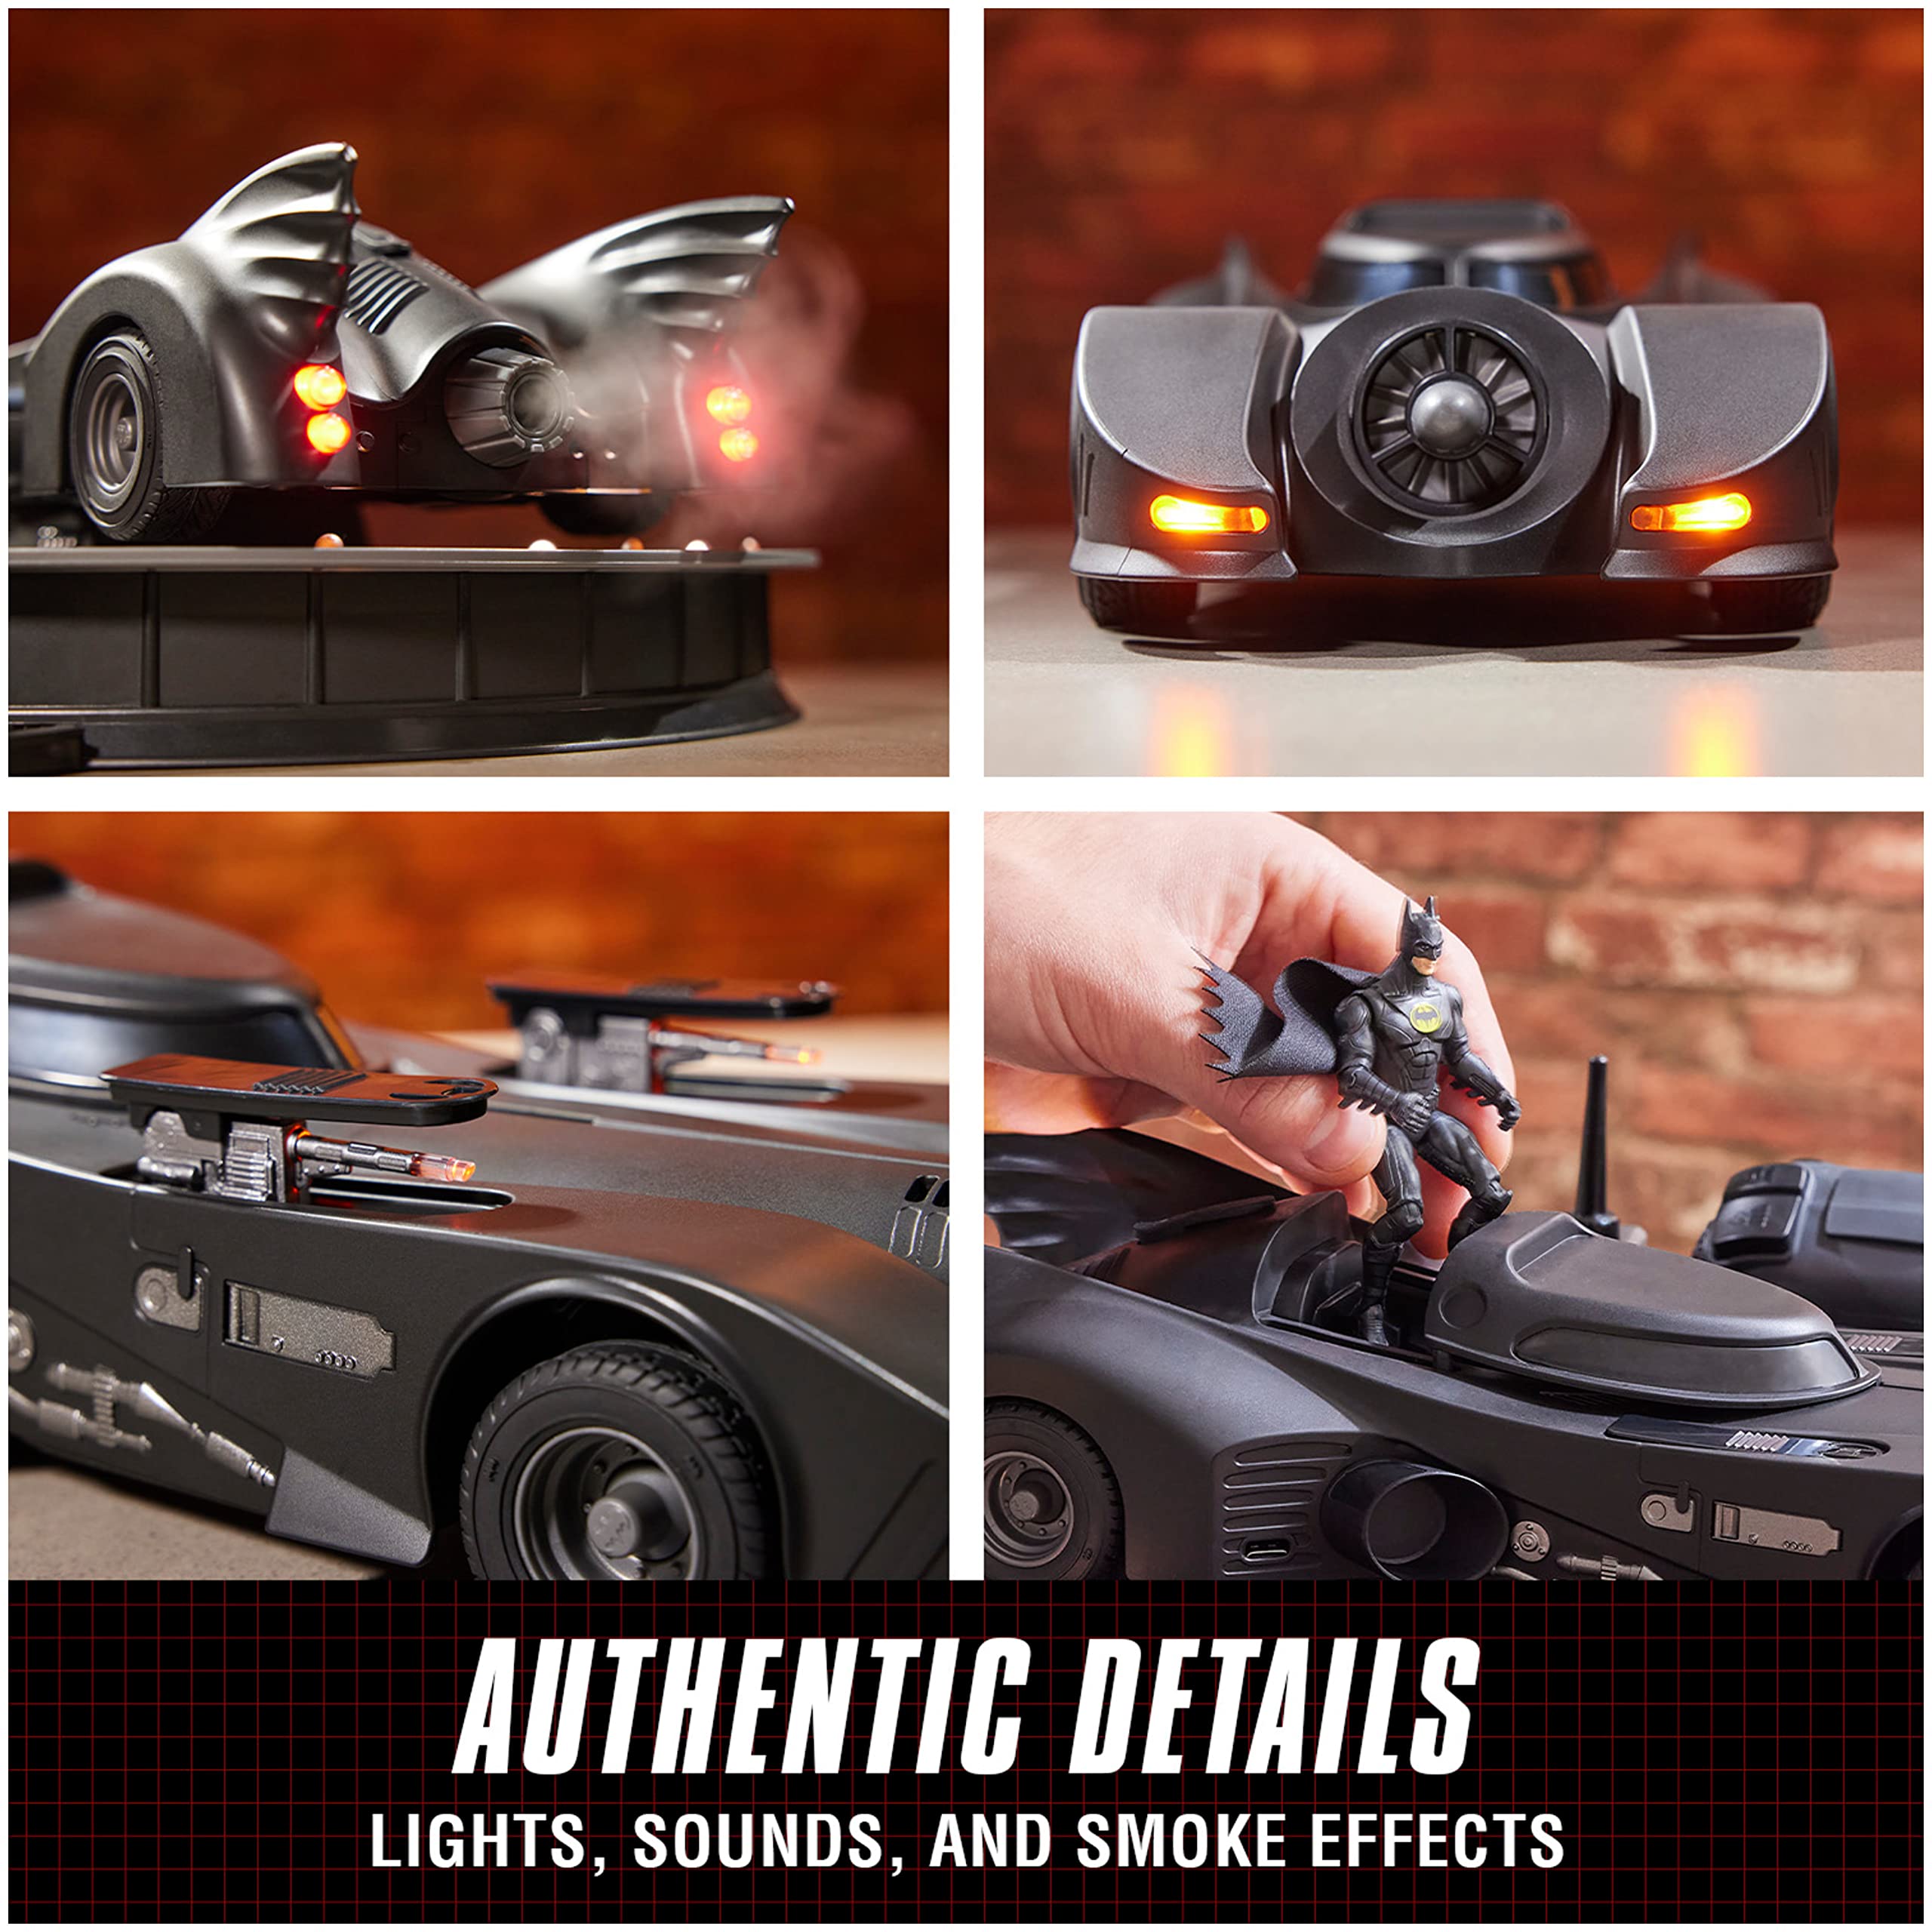 DC Comics, Official 1989 Batmobile RC, Exclusive Batman Figure, Limited Edition Collector's Item, Smoke Effects, Batcave Chargeable Base, Ages 14+